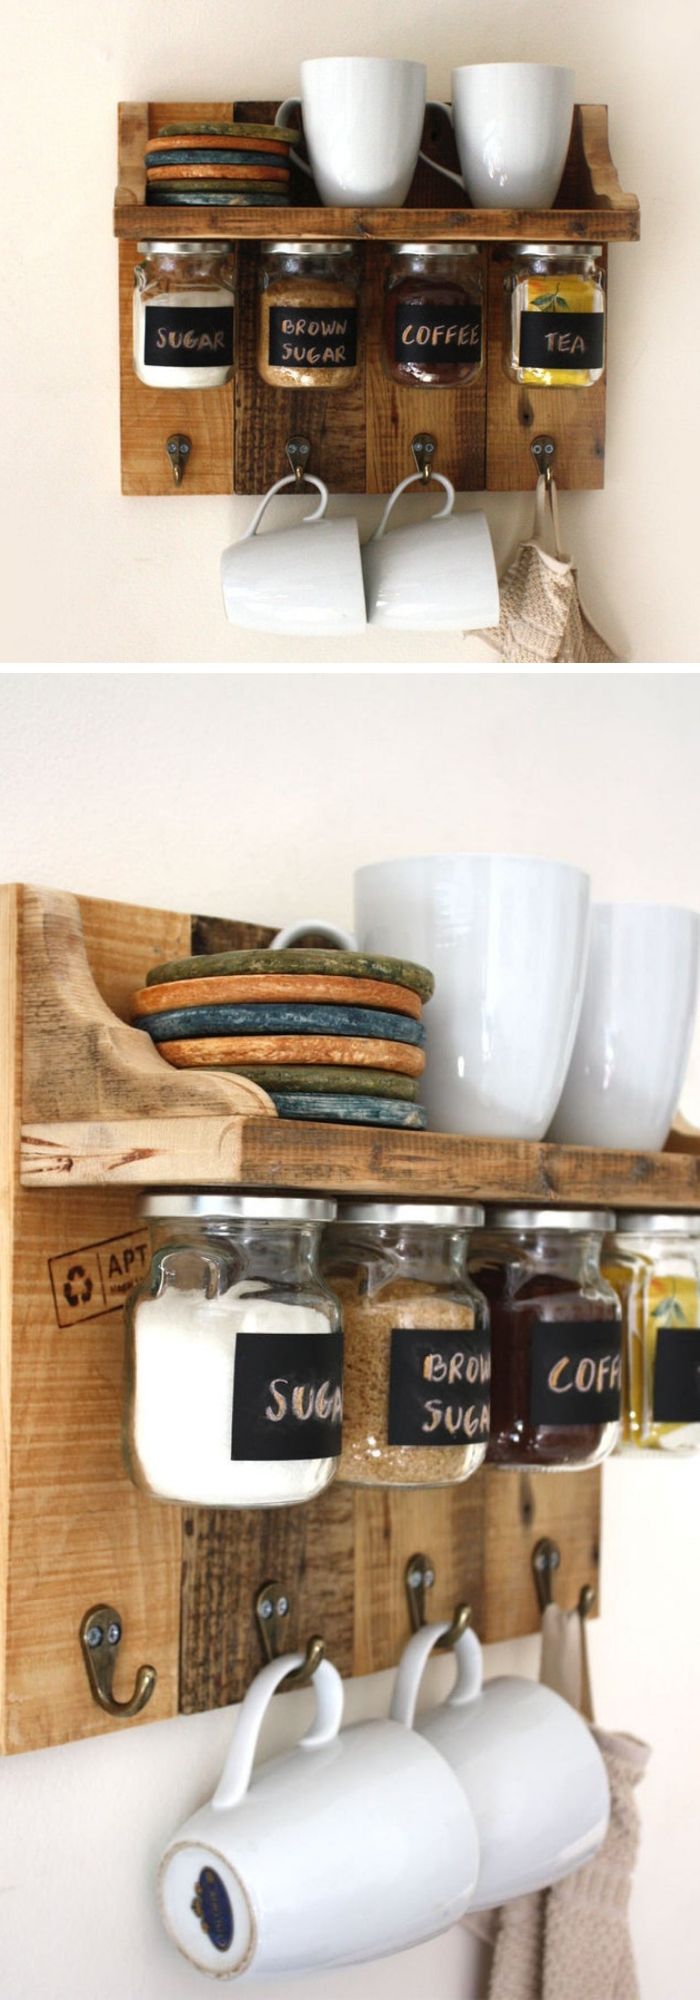 Gorgeous spices or coffee shelf with hanging jars